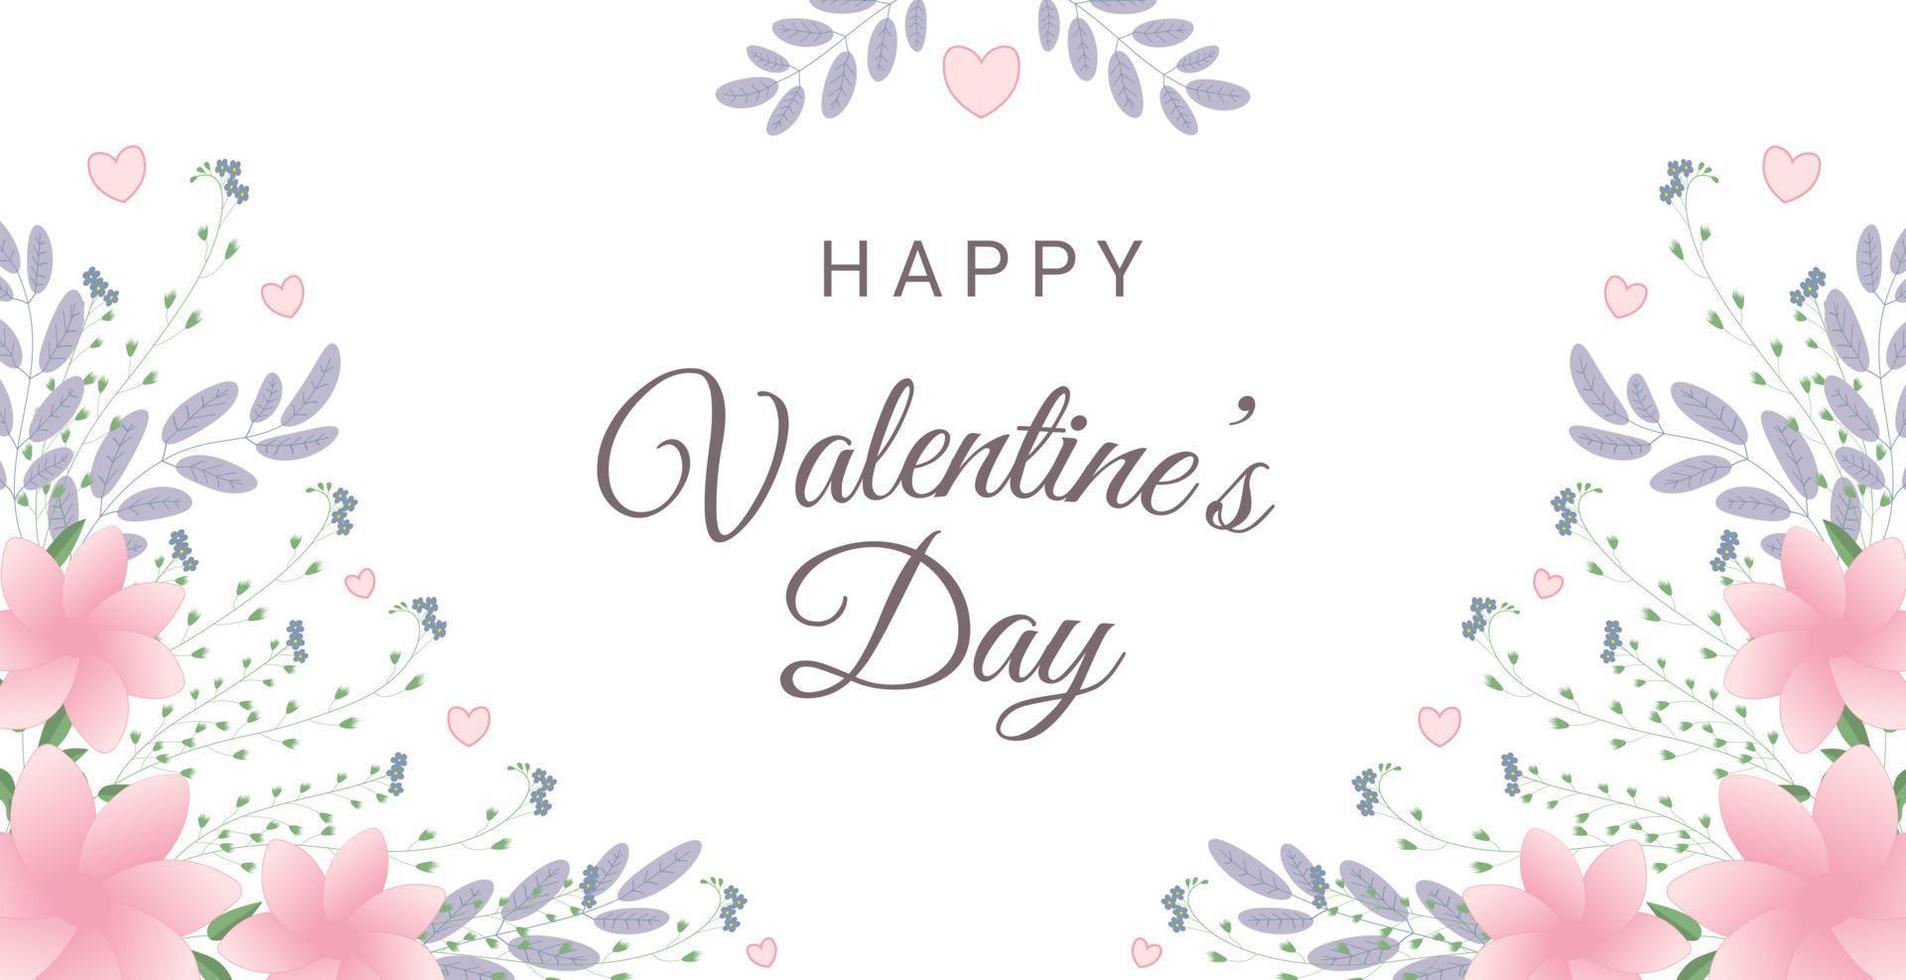 Happy valentine's day greeting card with flowers and hearts. Perfect for greeting cards, websites, banners or tags. vector